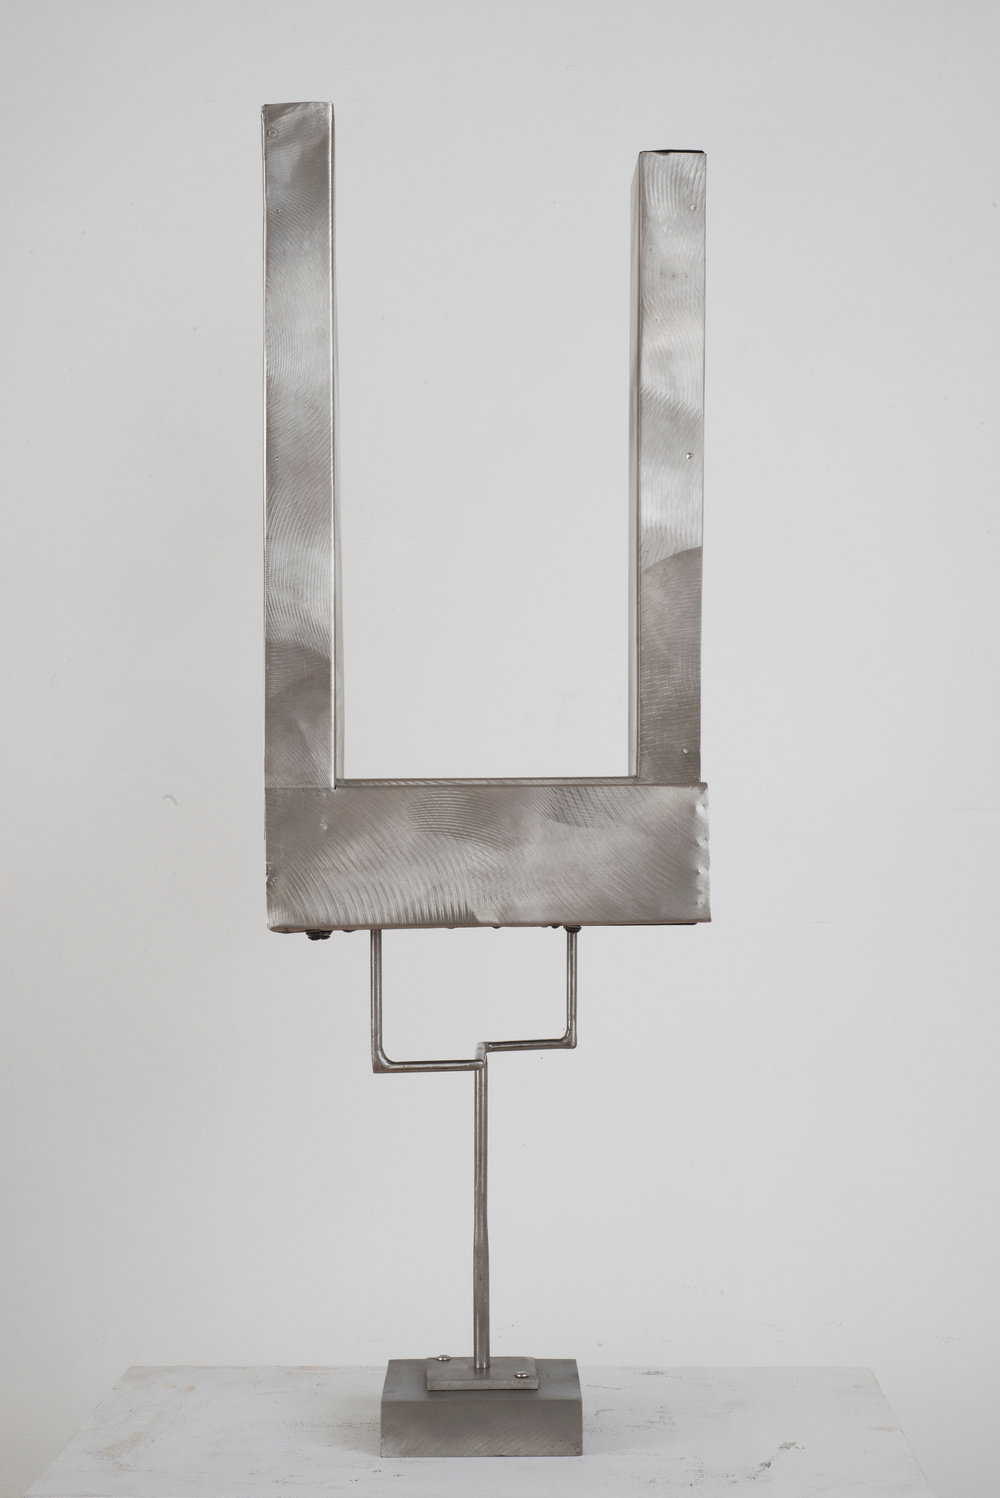 George rickey, conversation   mondrian meets malevich, 1990, stainless steel, 2 of 3, 30 x 9 1 2 x 8 in, non 53315, photo by orcutt